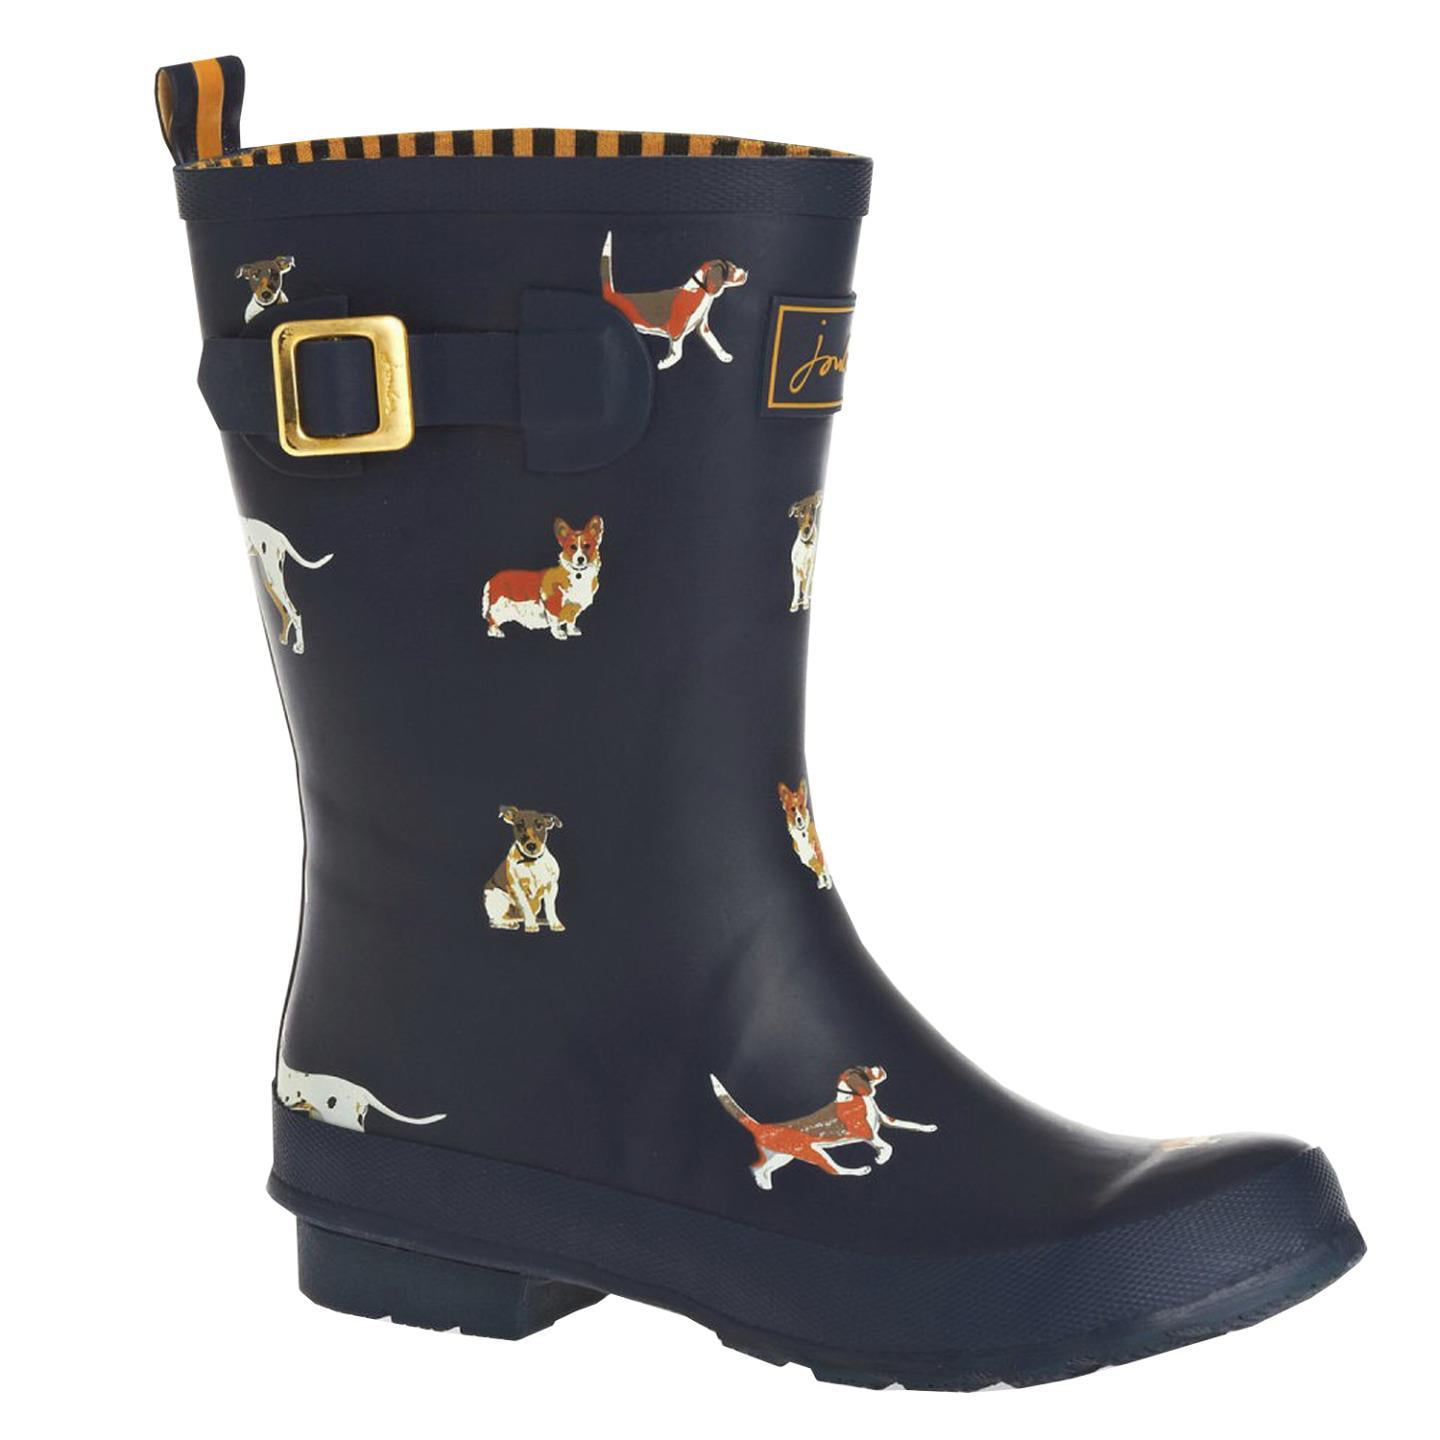 Joules - Joules Molly Welly Mid Height Rain Boots Navy Dogs US Size 6 ...